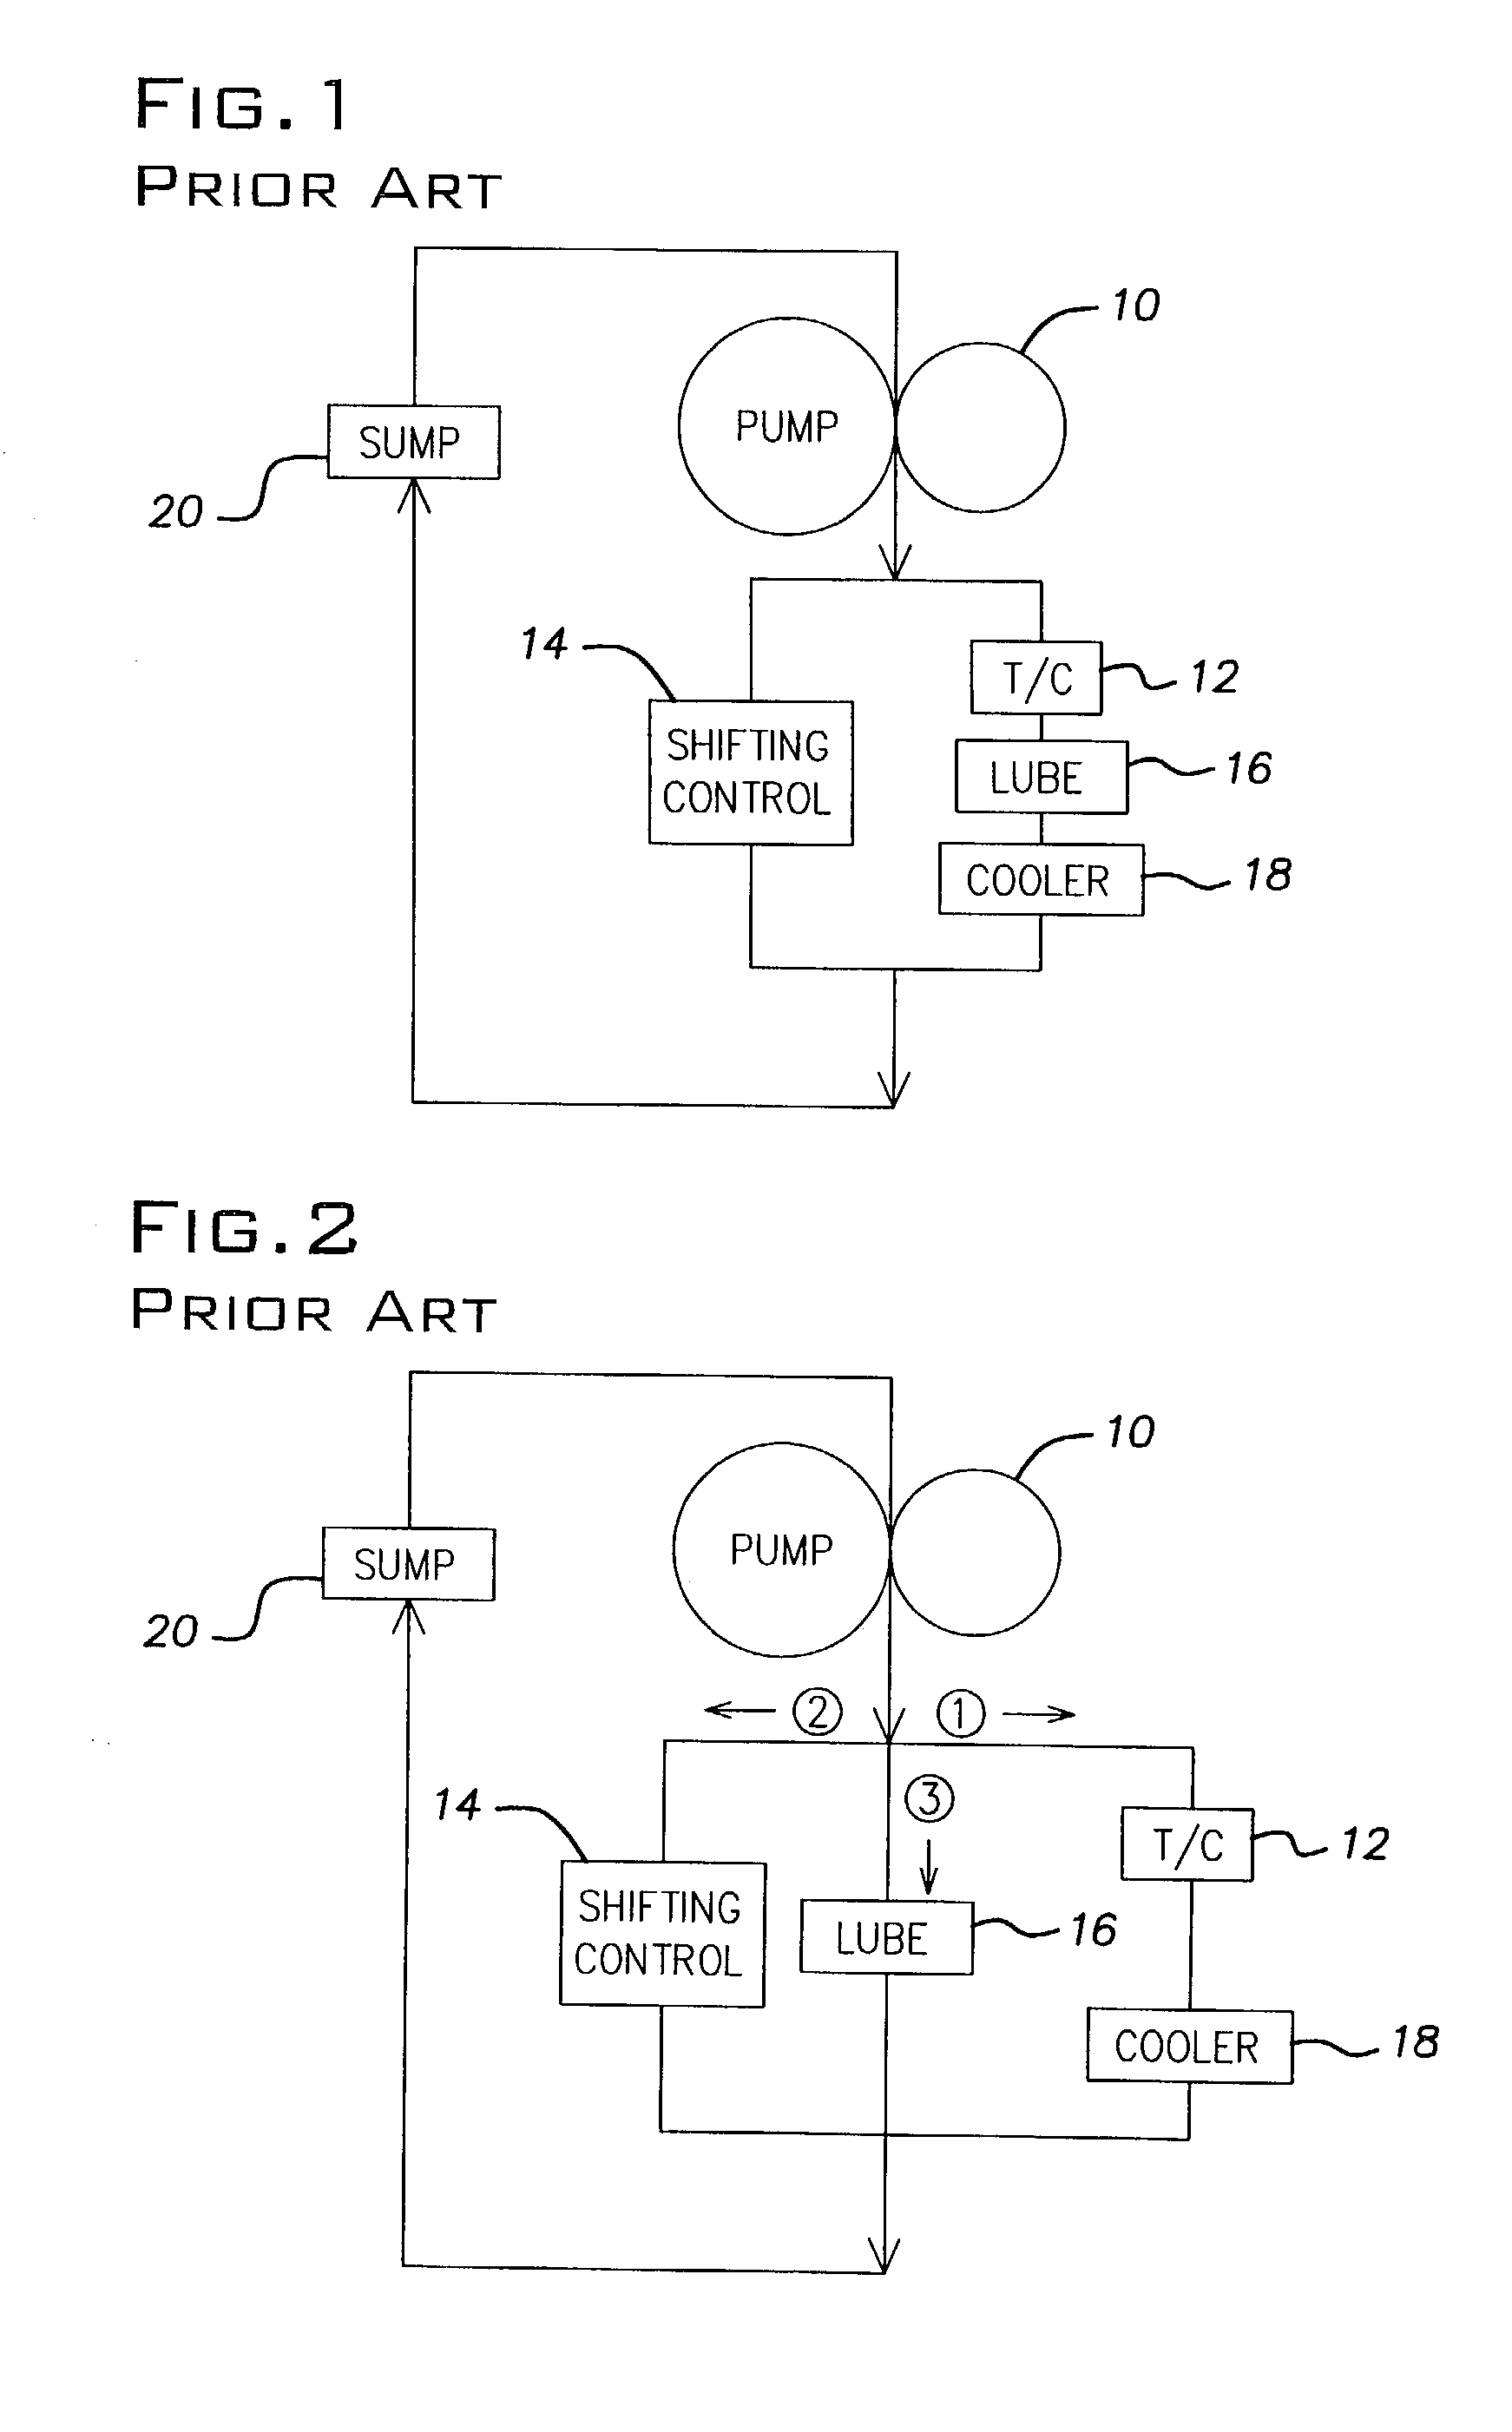 Transmission lubricant cooling system